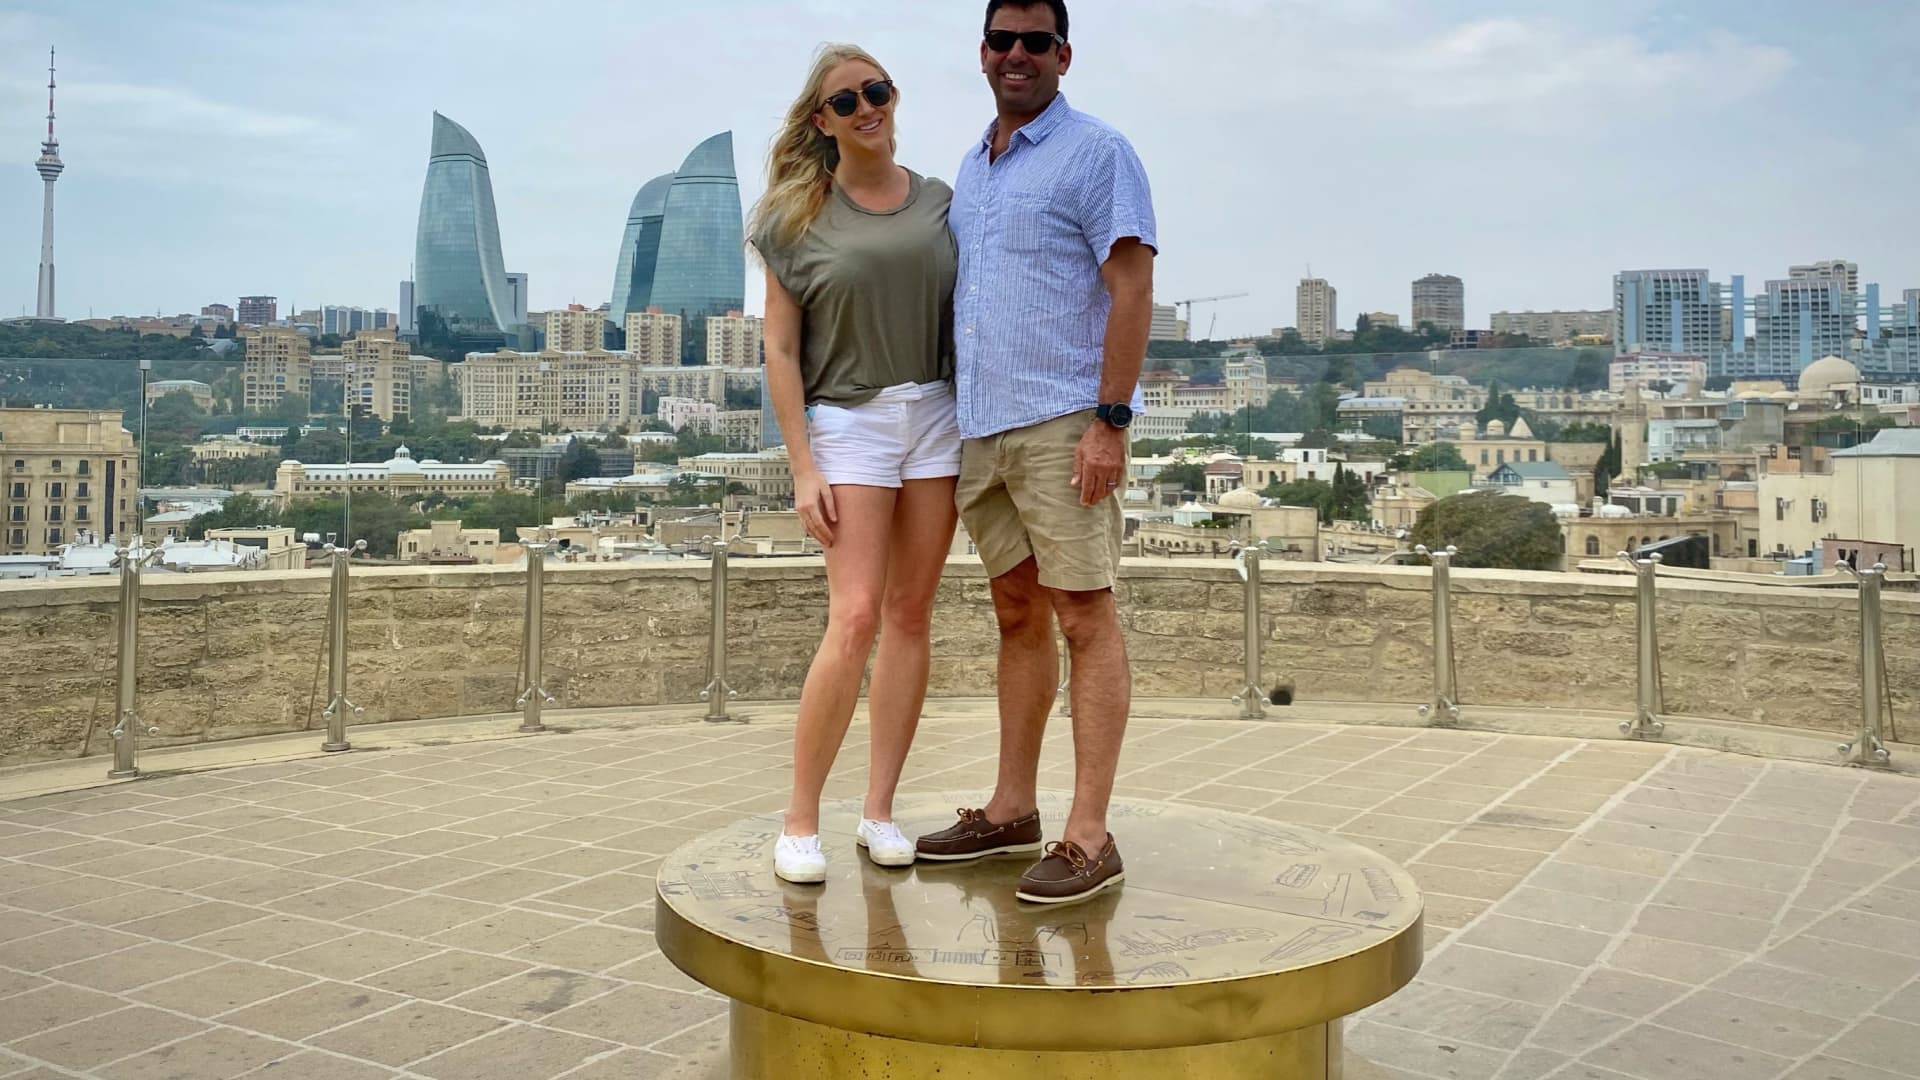 Miller and Feldman, standing in Baku, Azerbaijan, spend seven months of the year traveling. Their goal is to visit every country on Earth.